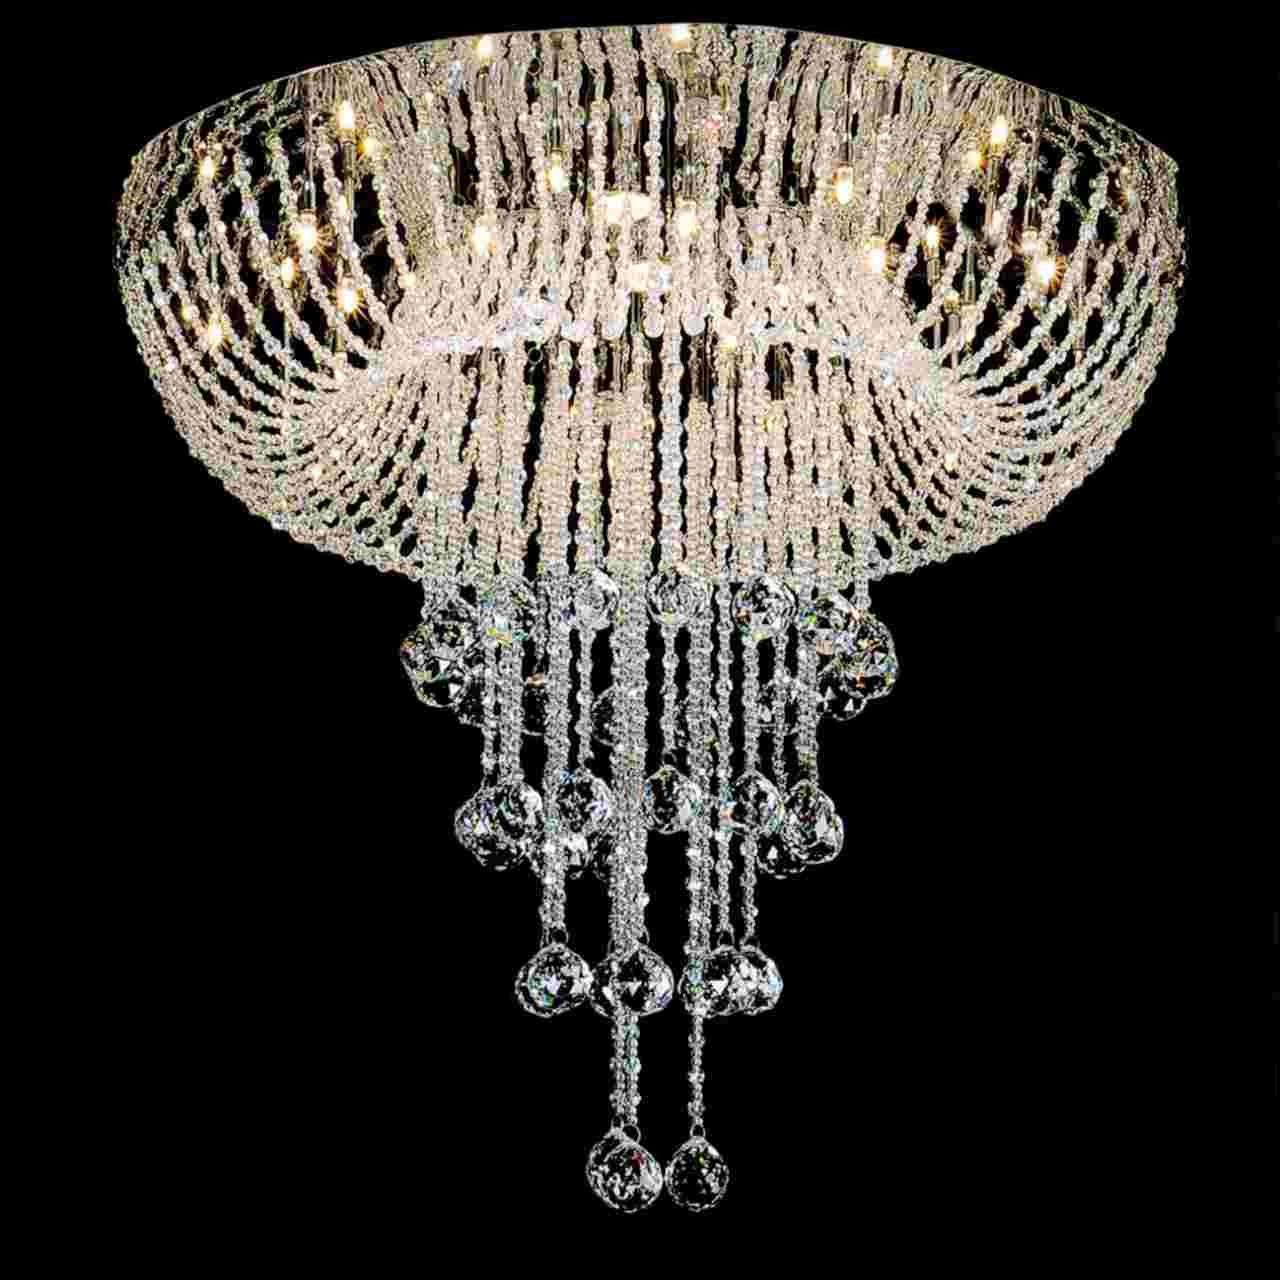 Brizzo Lighting Stores 40mm Asfour Crystal Ball 30 Pbo 701 40 Intended For Lead Crystal Chandeliers (View 7 of 12)